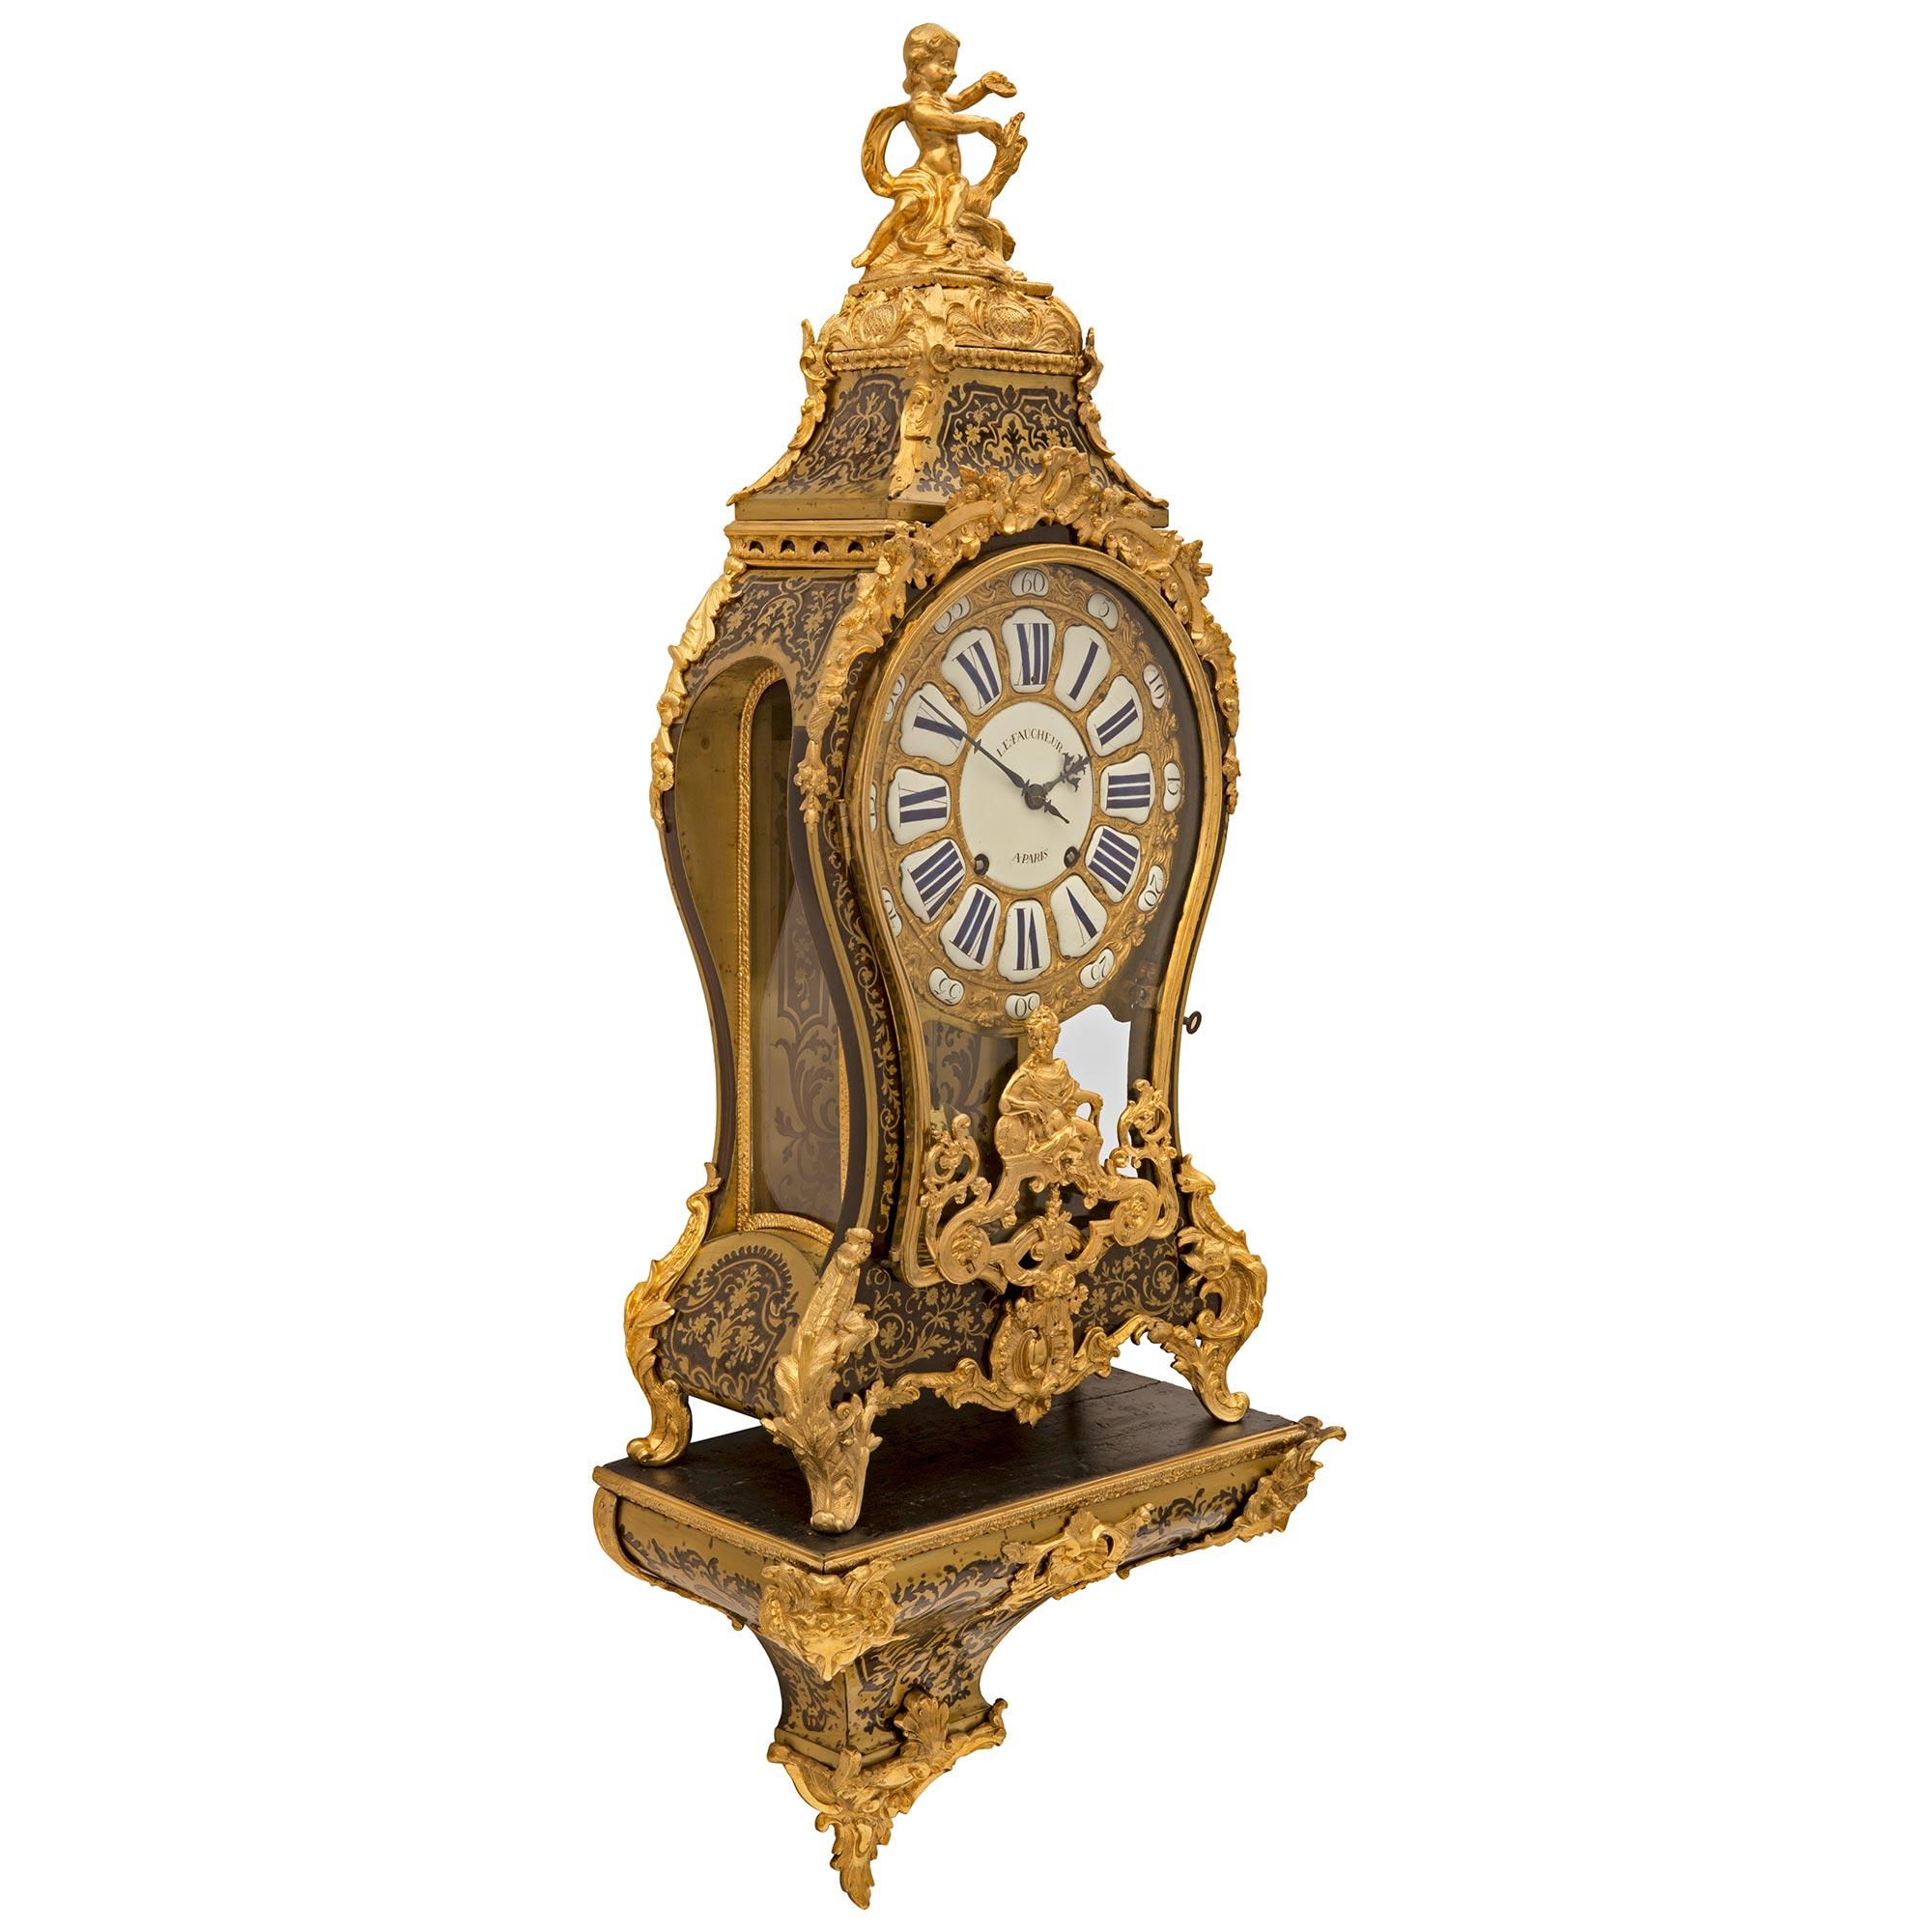 A large and important French 18th century Louis XV period Tortoiseshell and ormolu Boulle cartel clock signed Le Faucheur, A Paris. The clock is raised on its original display shelf with an exceptional curved tapered design with a stunning scrolled